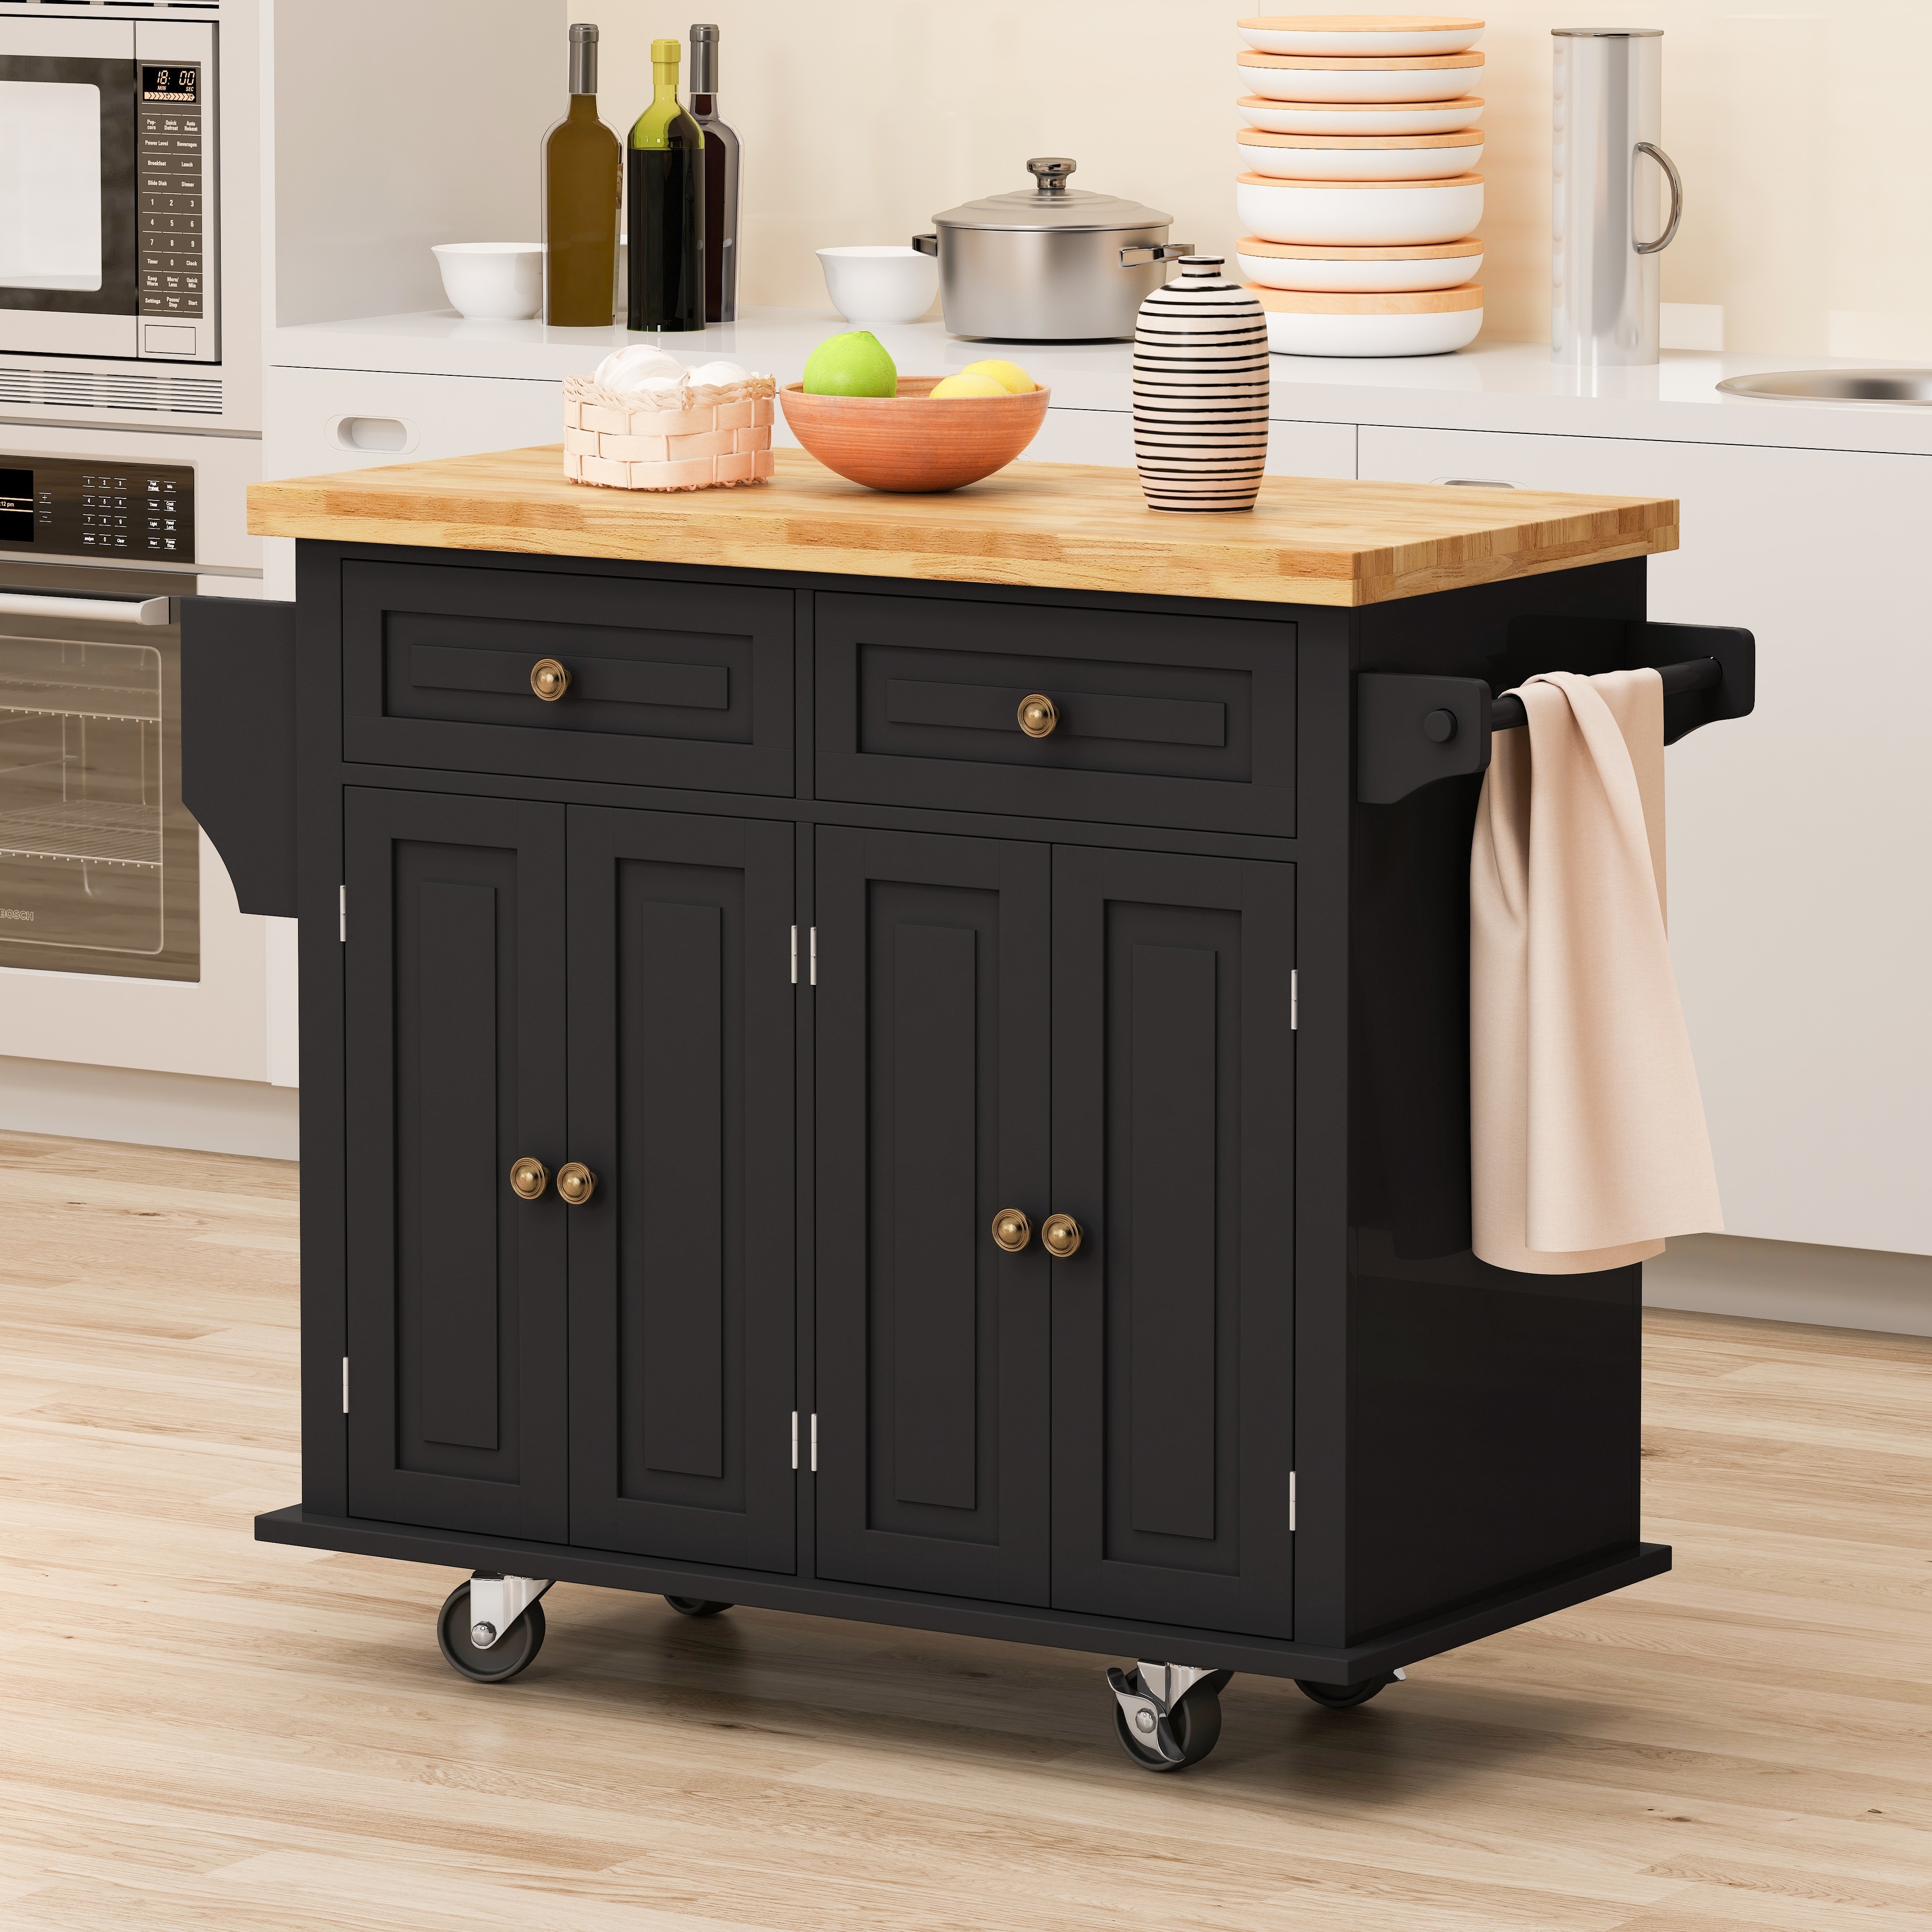 HOMCOM Rolling Kitchen Island with Storage, Portable Kitchen Cart with  Stainless Steel Top, 2 Drawers, Spice, Knife and Towel Rack and Cabinets,  Black